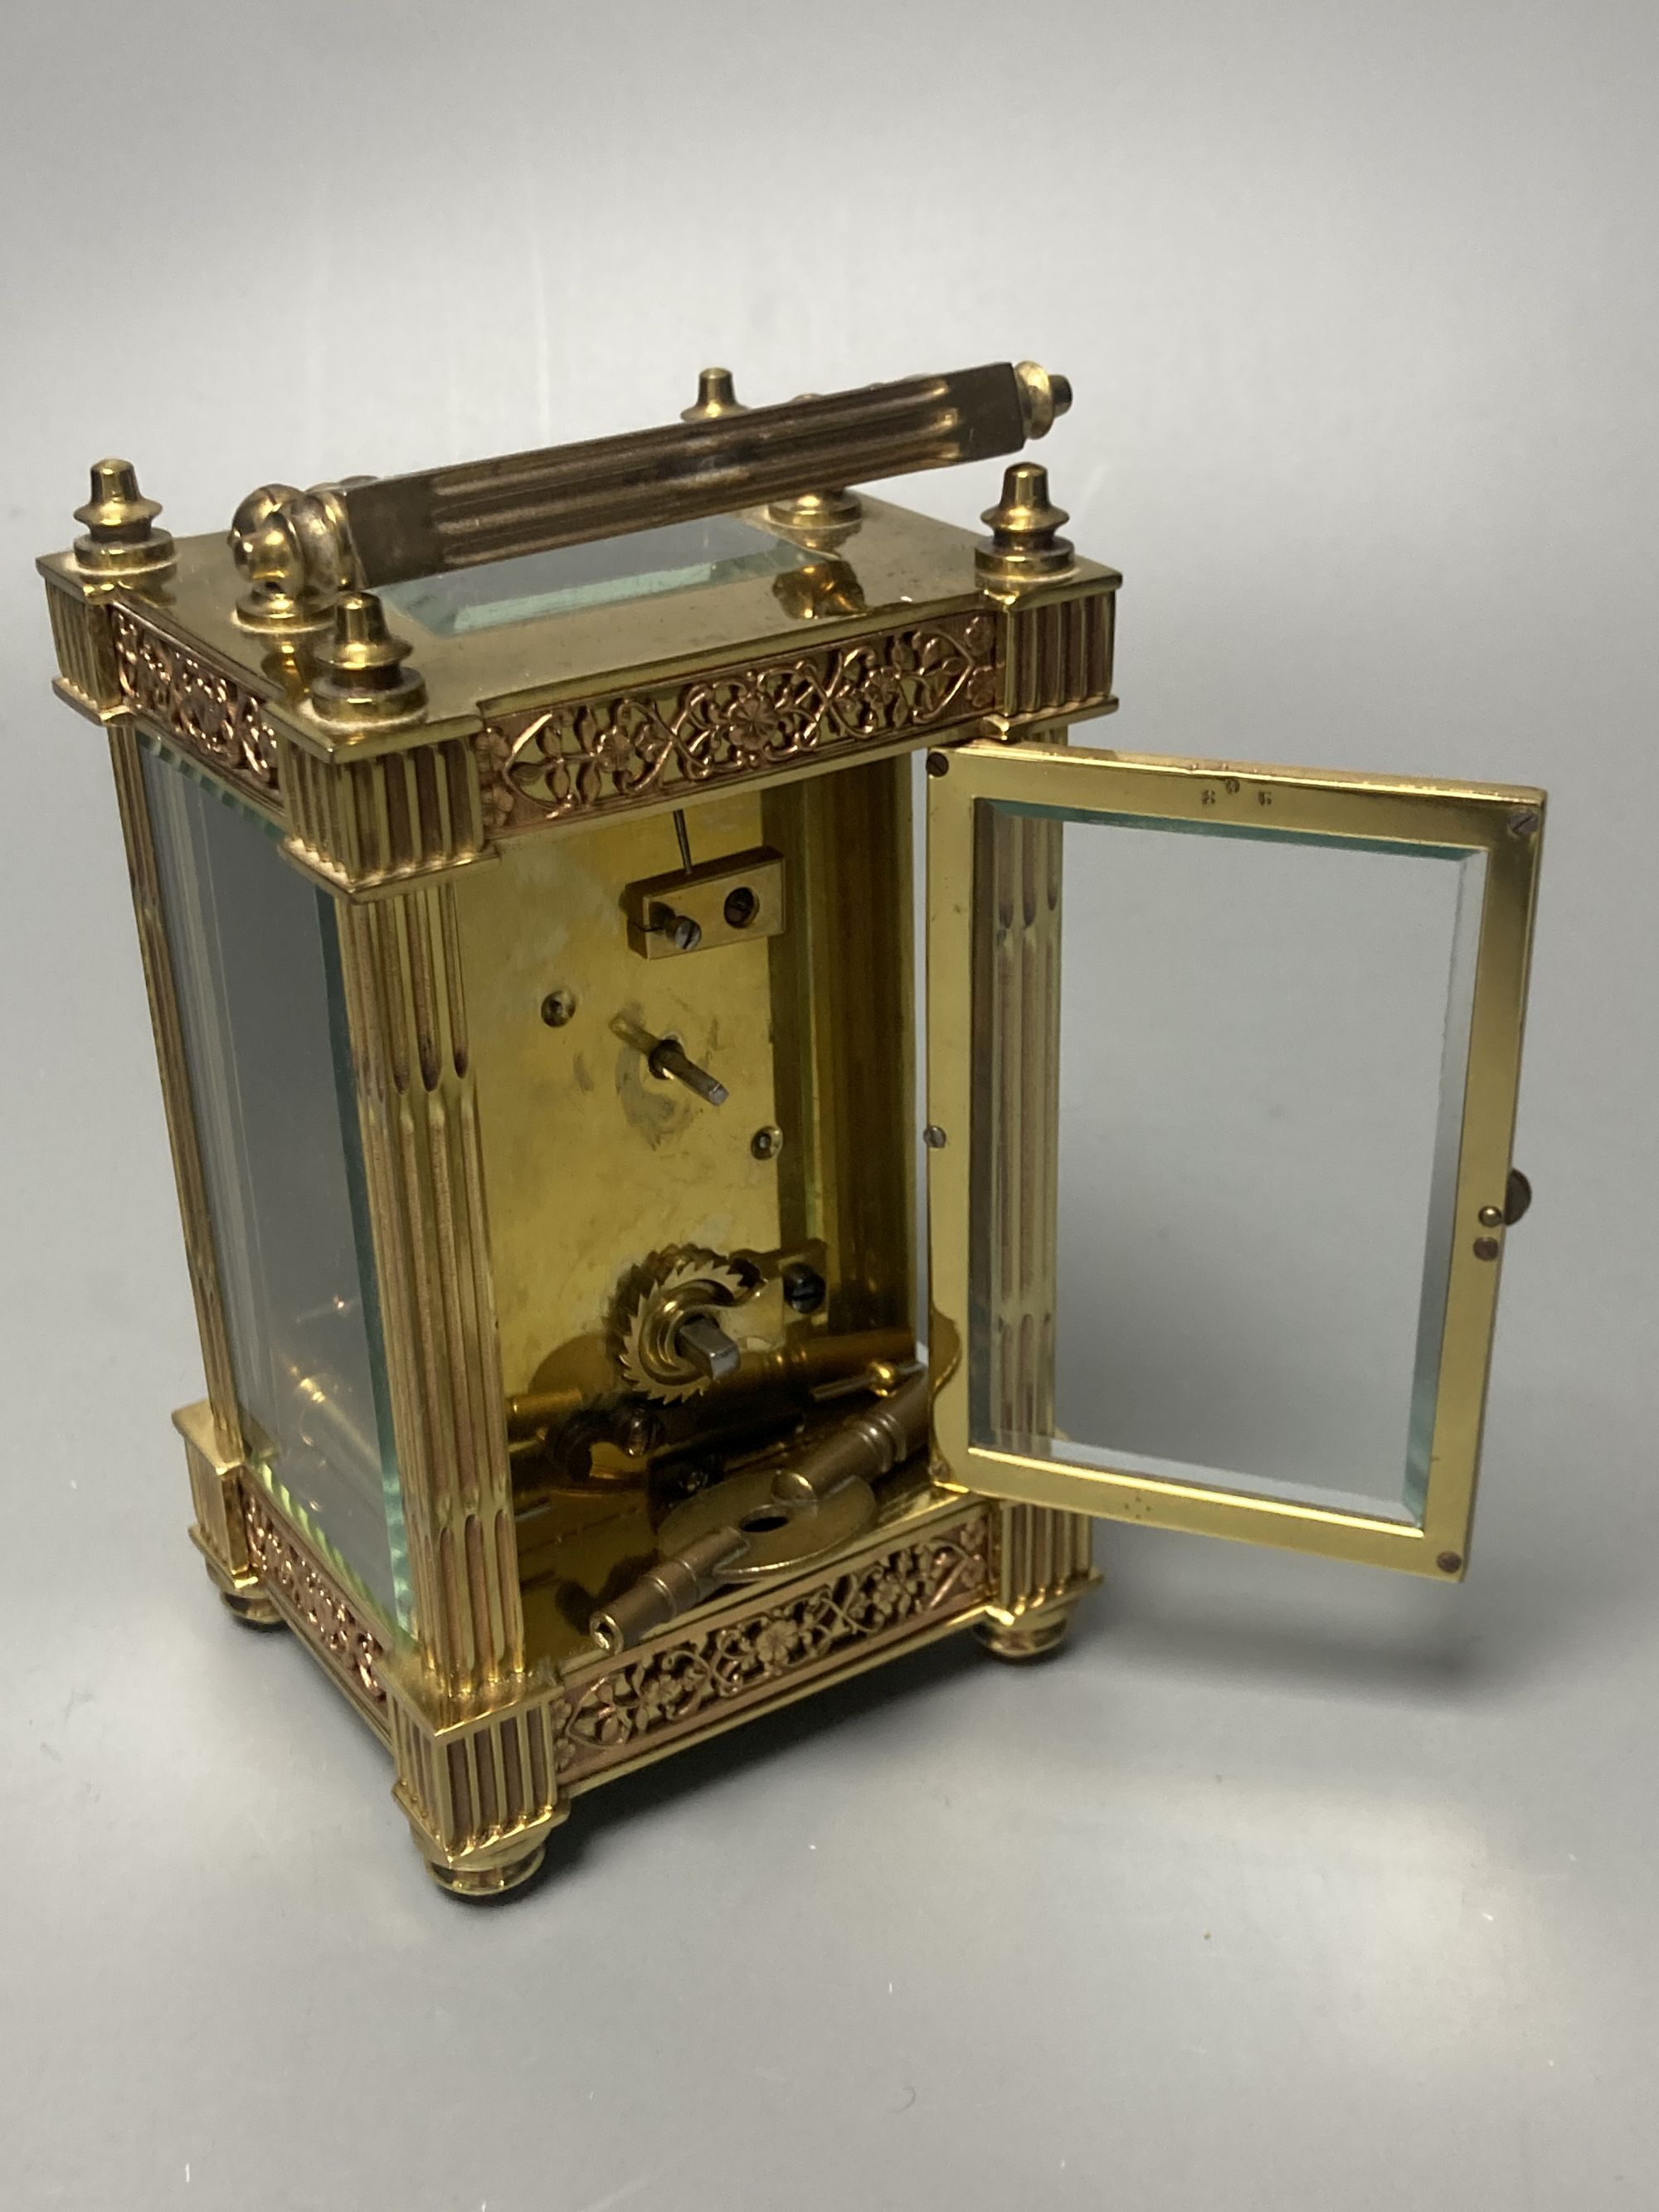 An early 20th century French brass carriage timepiece, 13cm